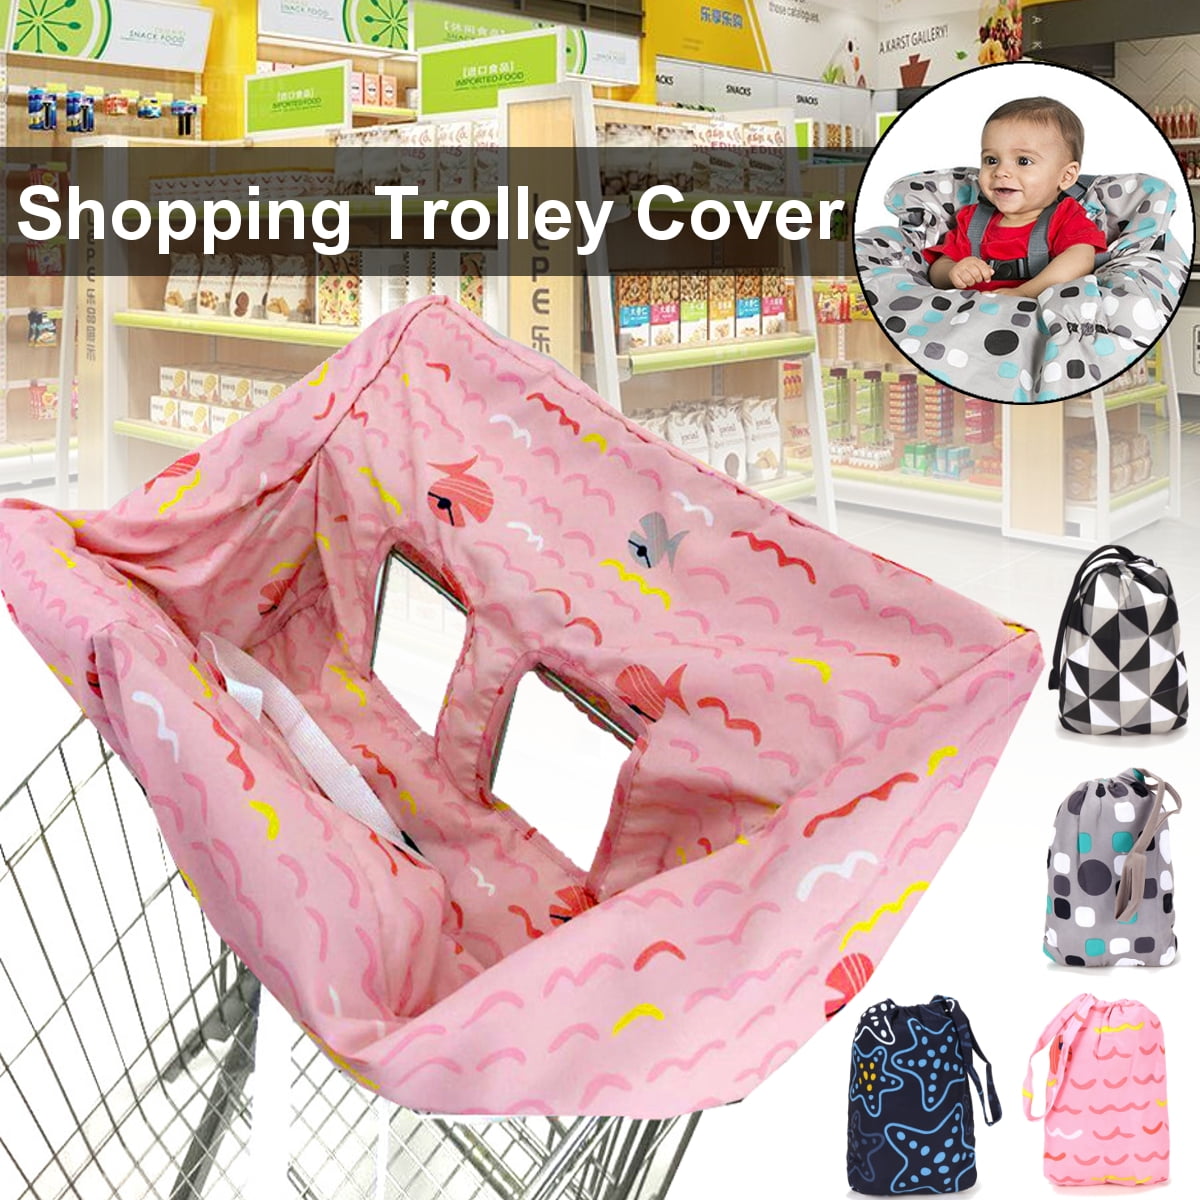 Per 2-in-1 Shopping Cart Cover Polka Dot High Chair Cover Protective Cushion Full Safety Harness Universal Fit Foldable and Washable 